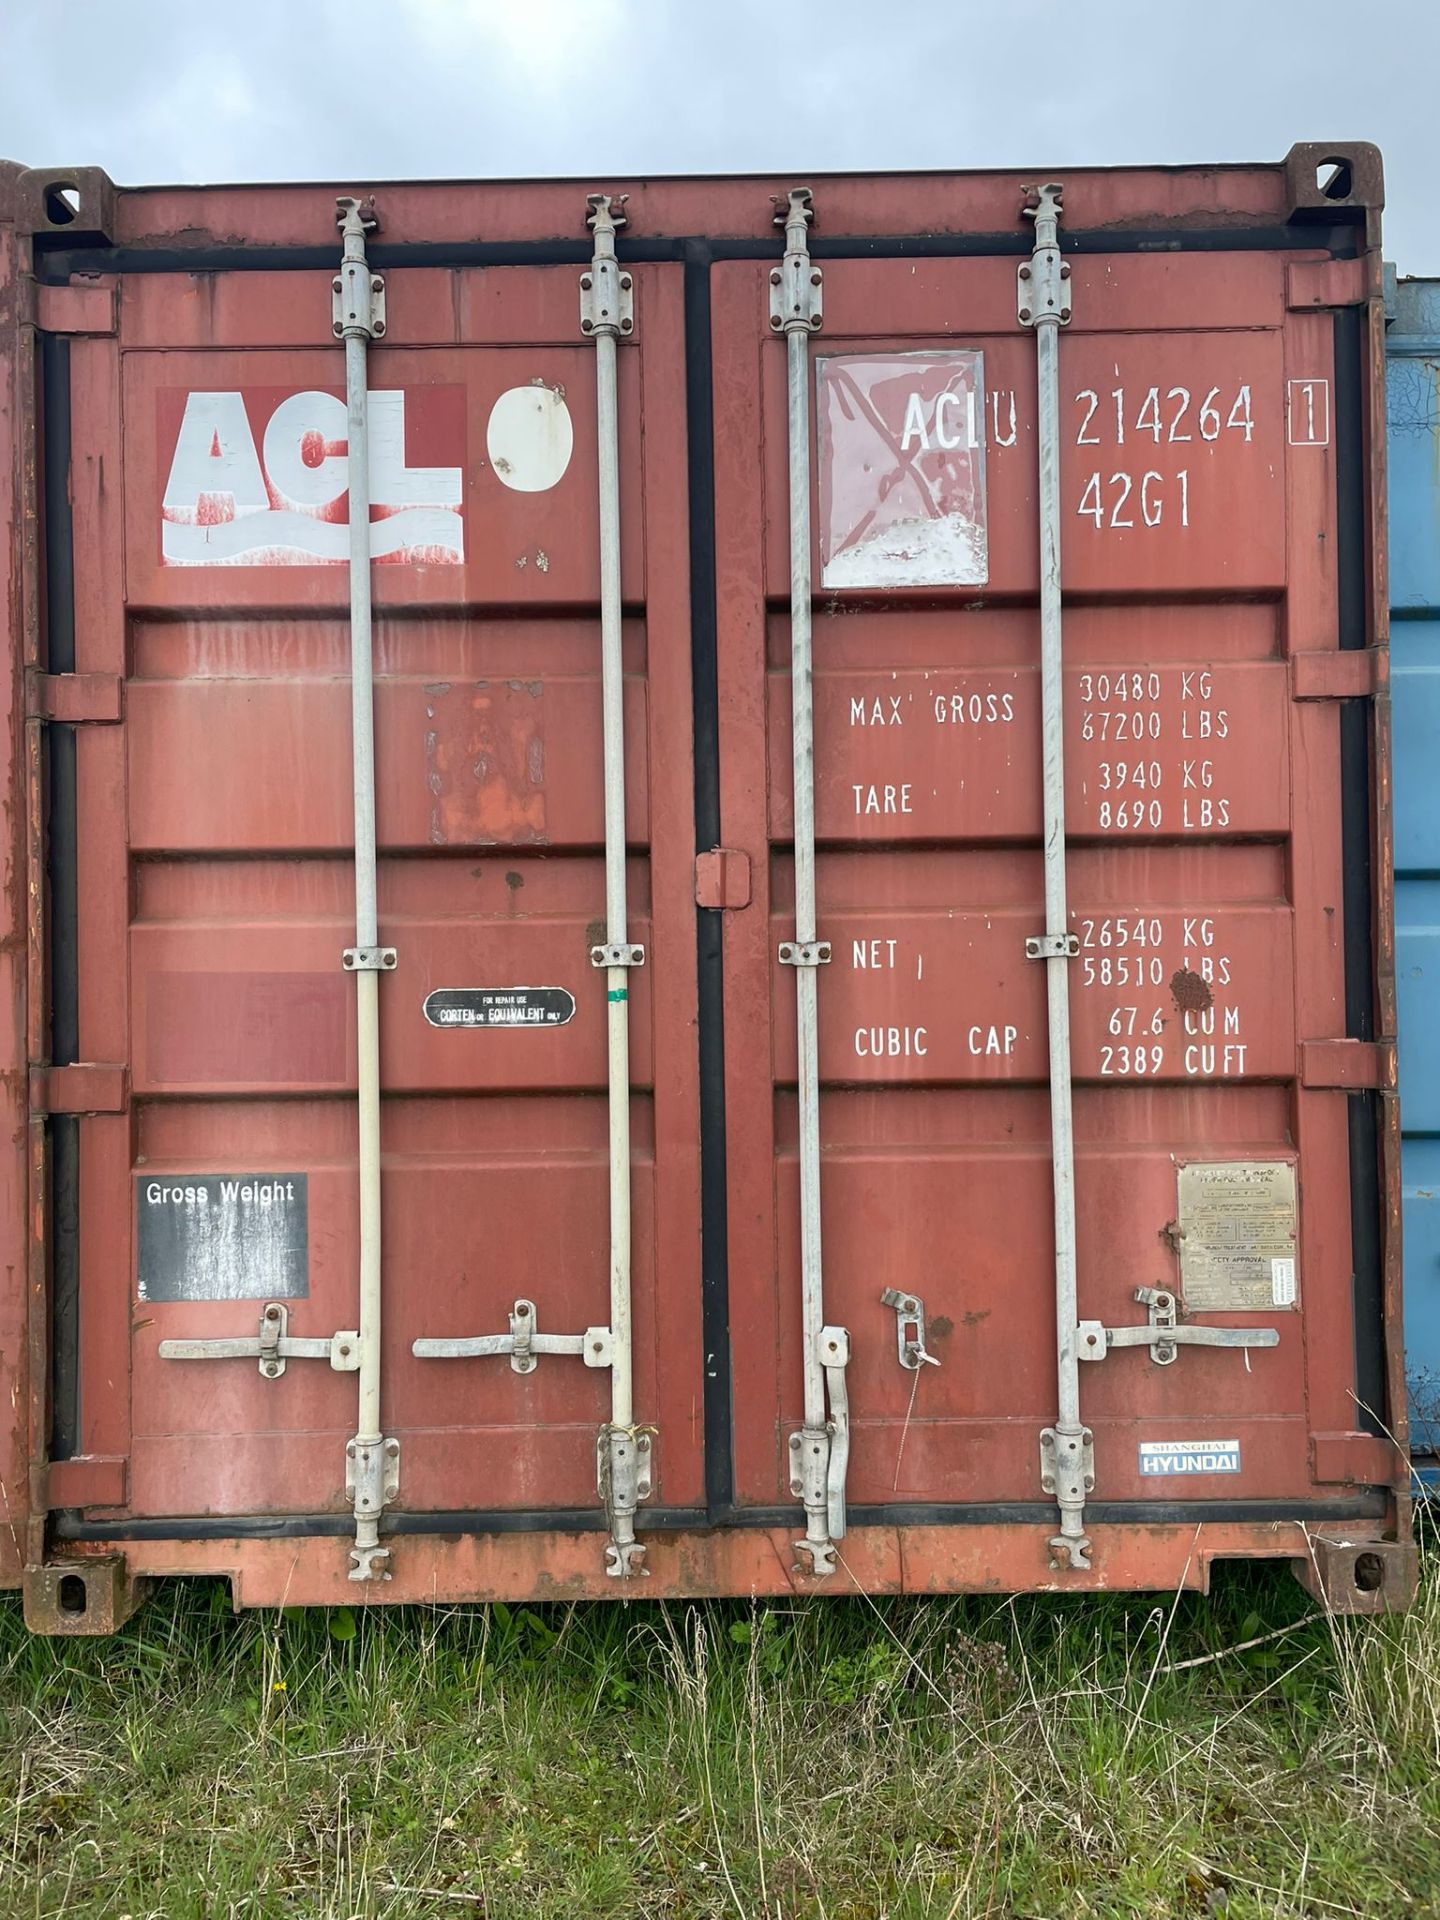 Shipping Container - ref ACLU2142641 - NO RESERVE (40’ GP - Standard)